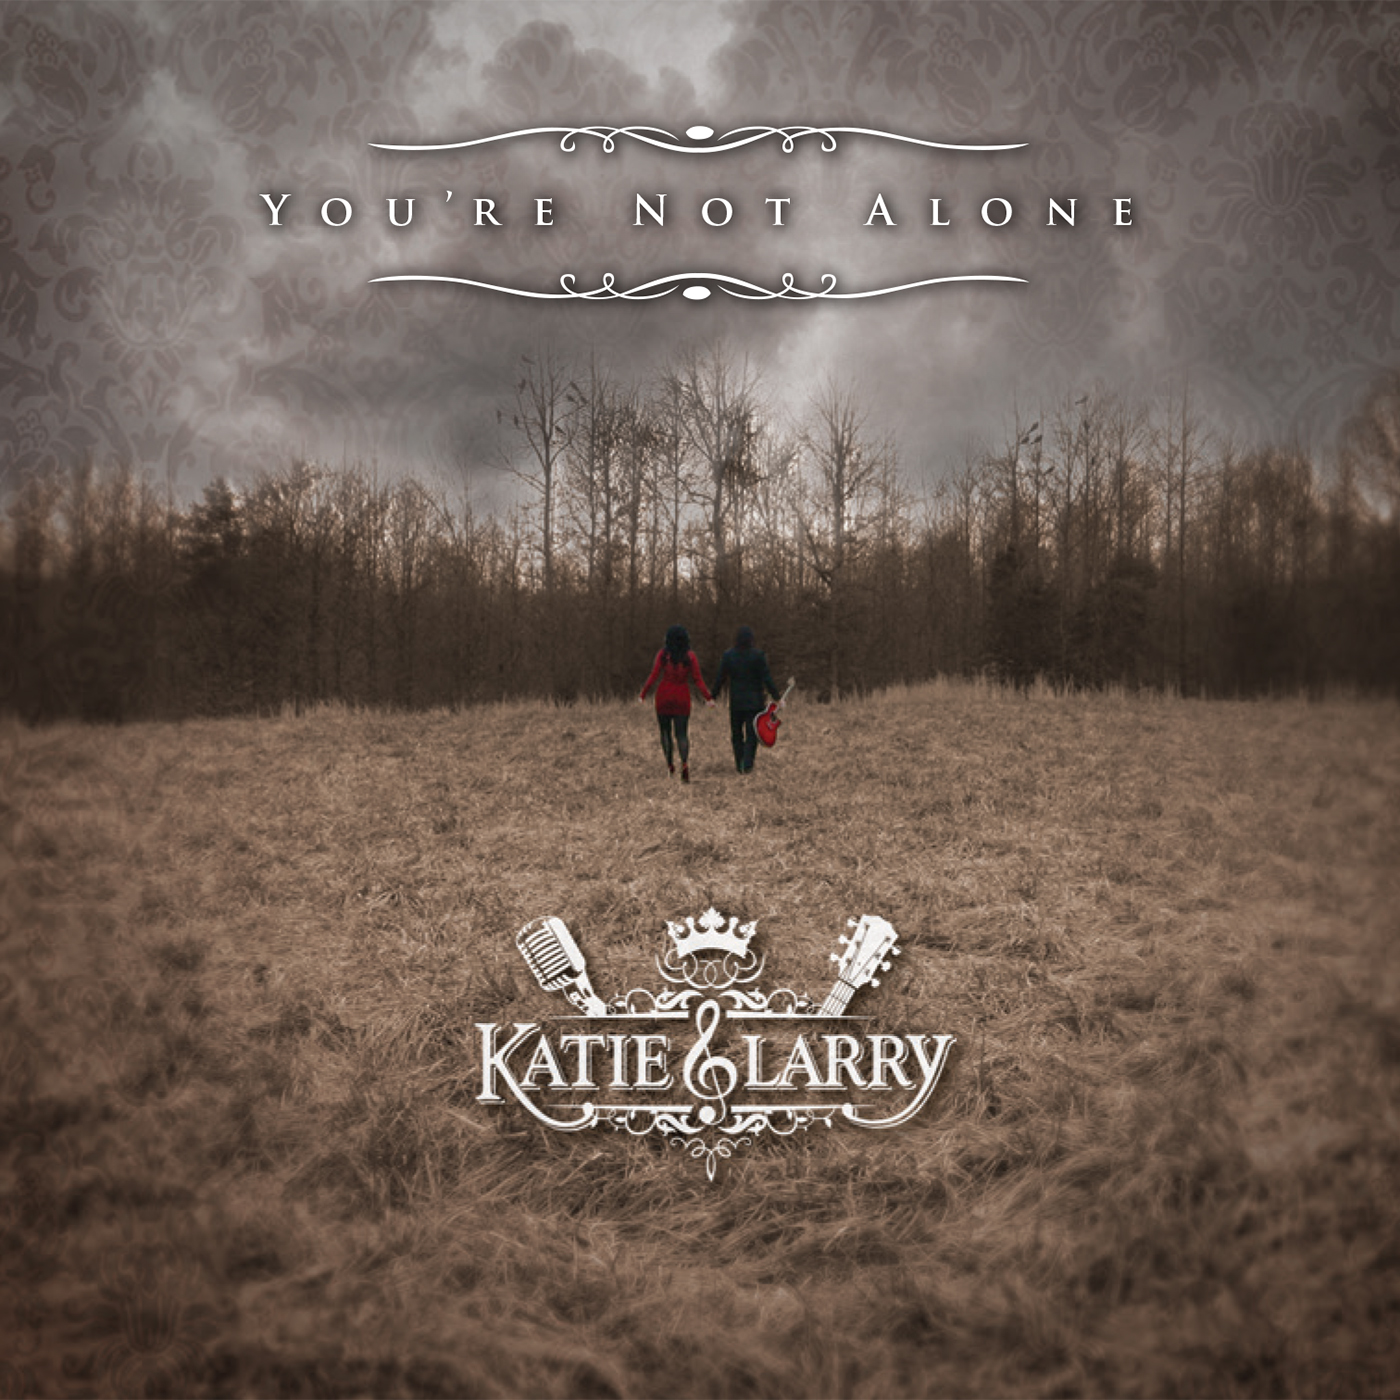 Katie & Larry "You're Not Alone" CD Cover